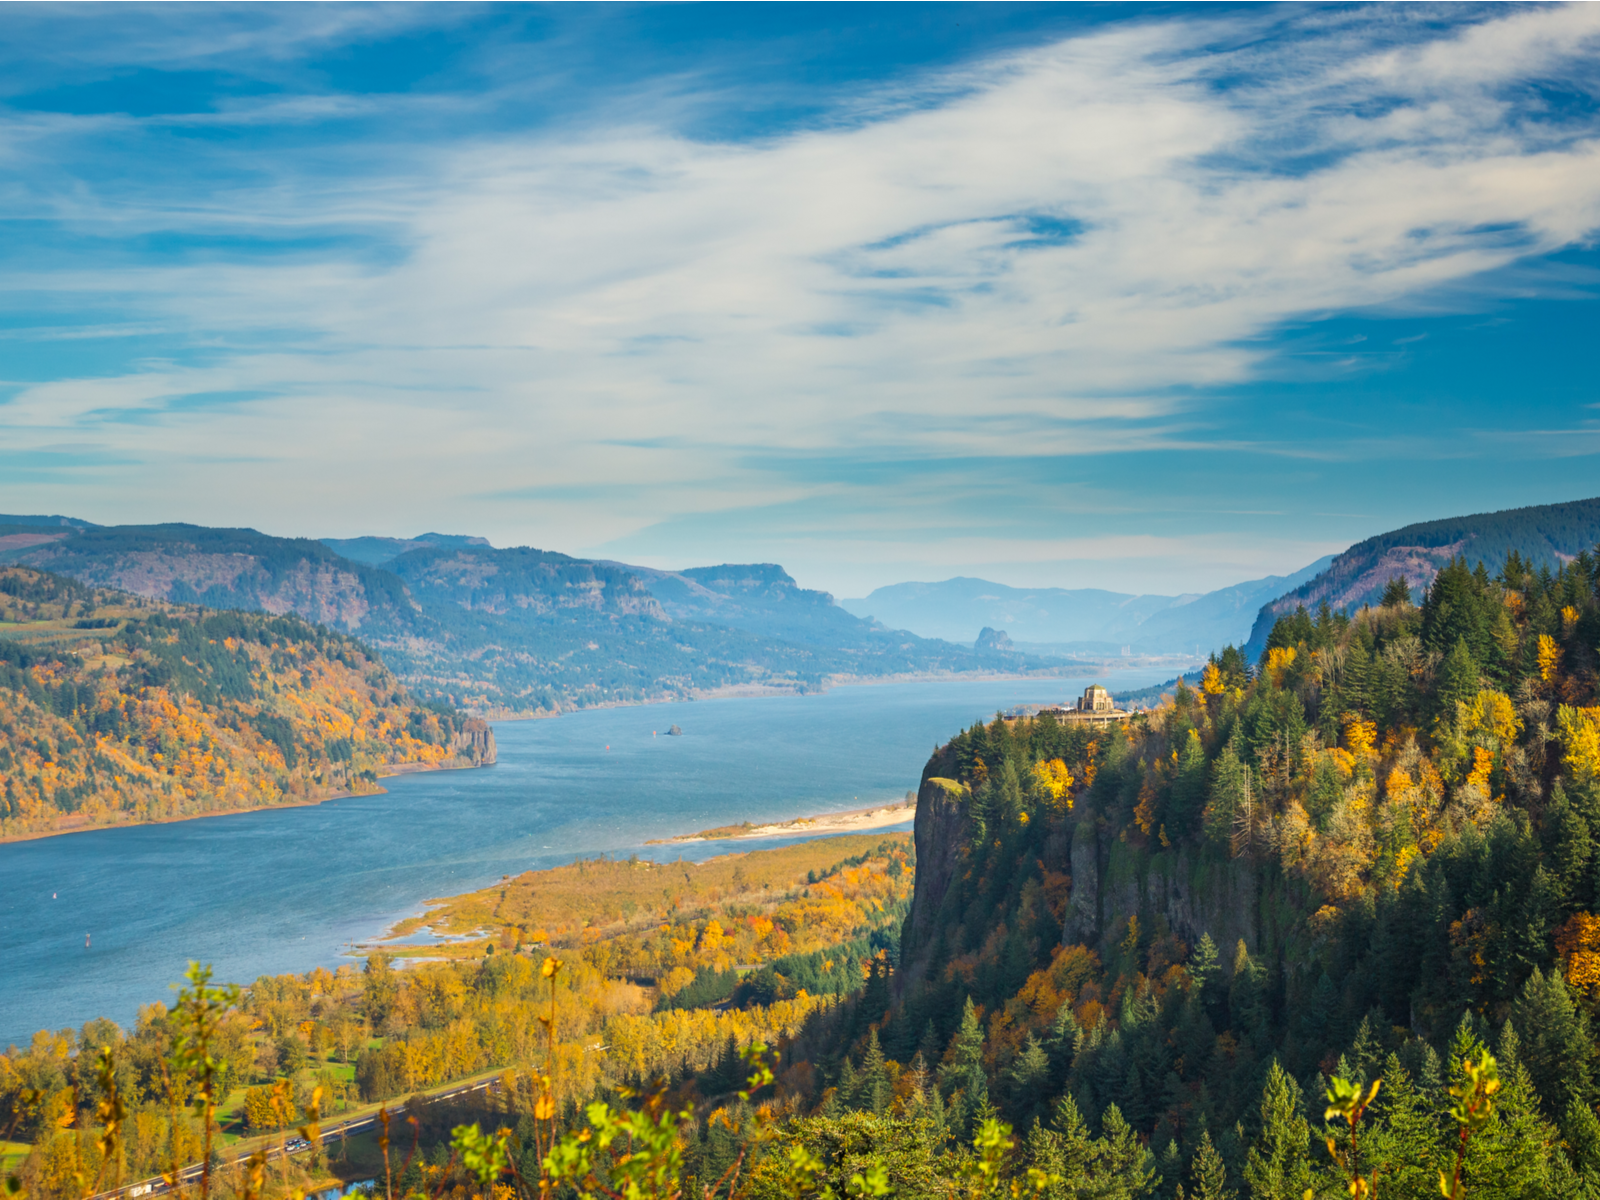 The Crown Point and Vista House surrounded by vibrant foliage in Autumn at Columbia River Gorge National Scenic Area, a piece on the most beautiful places in the US, with the calm flowing river